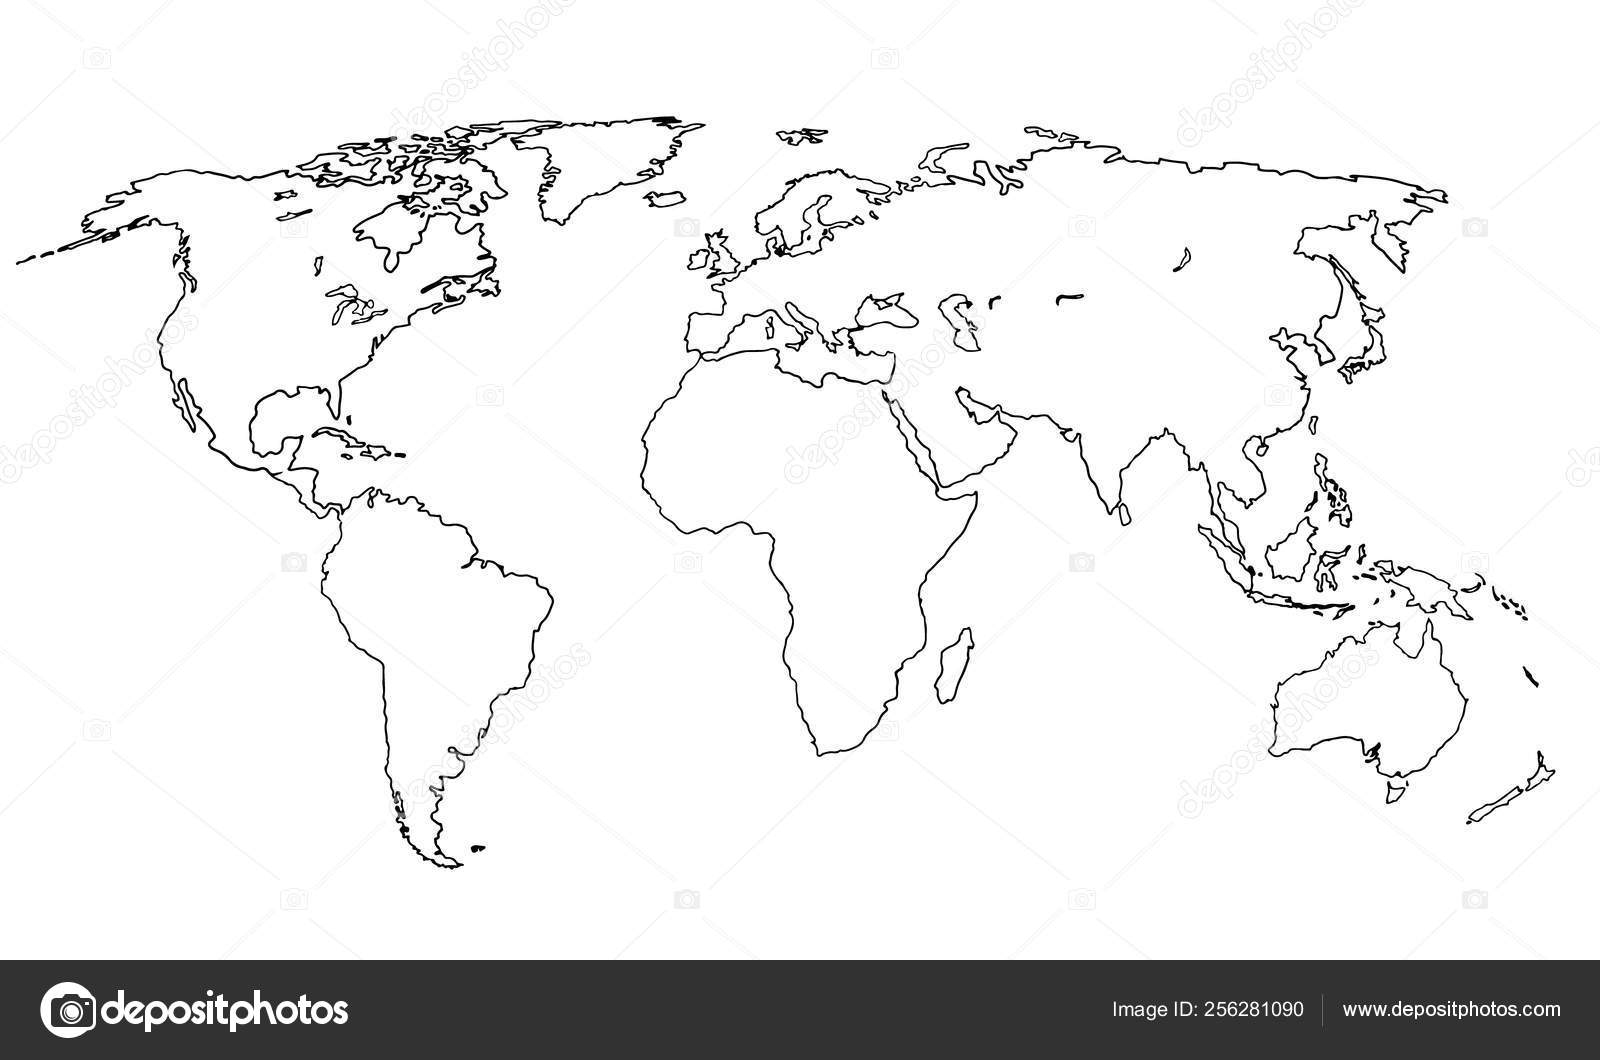 Doodle world map sketch. Planet Earth sketch — Stock Vector ...